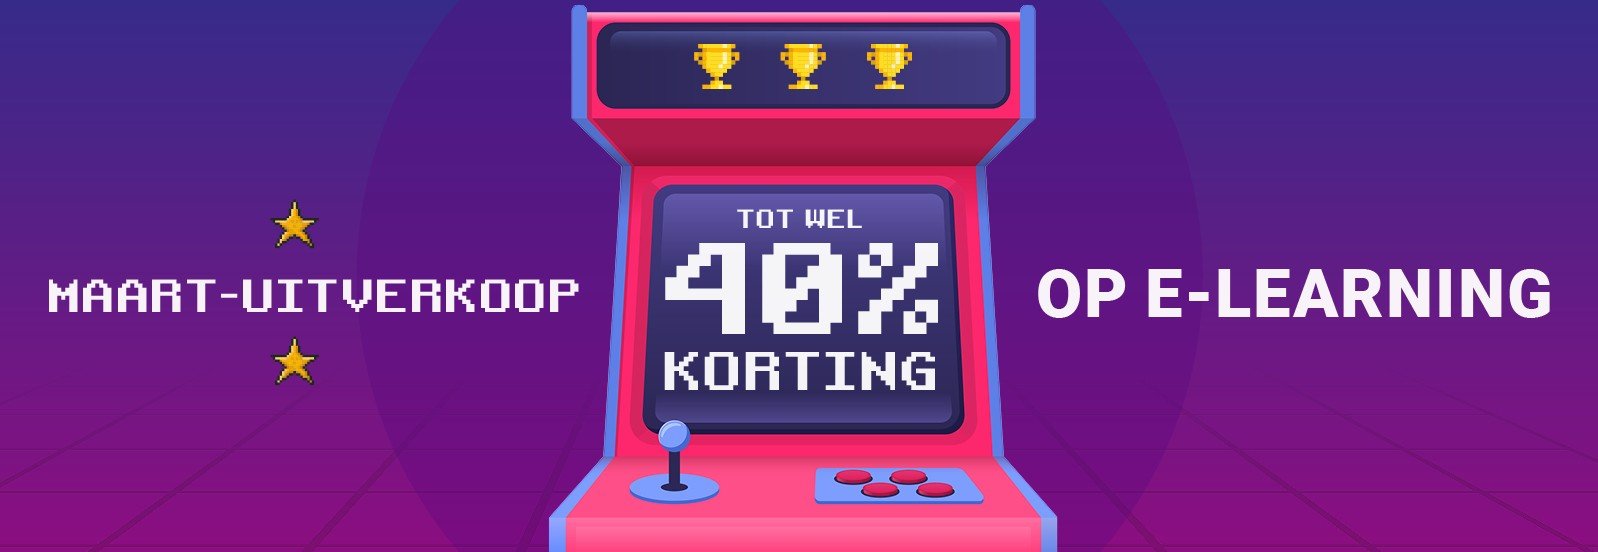 <p>TOT 40% KORTING OP E-LEARNING</p>